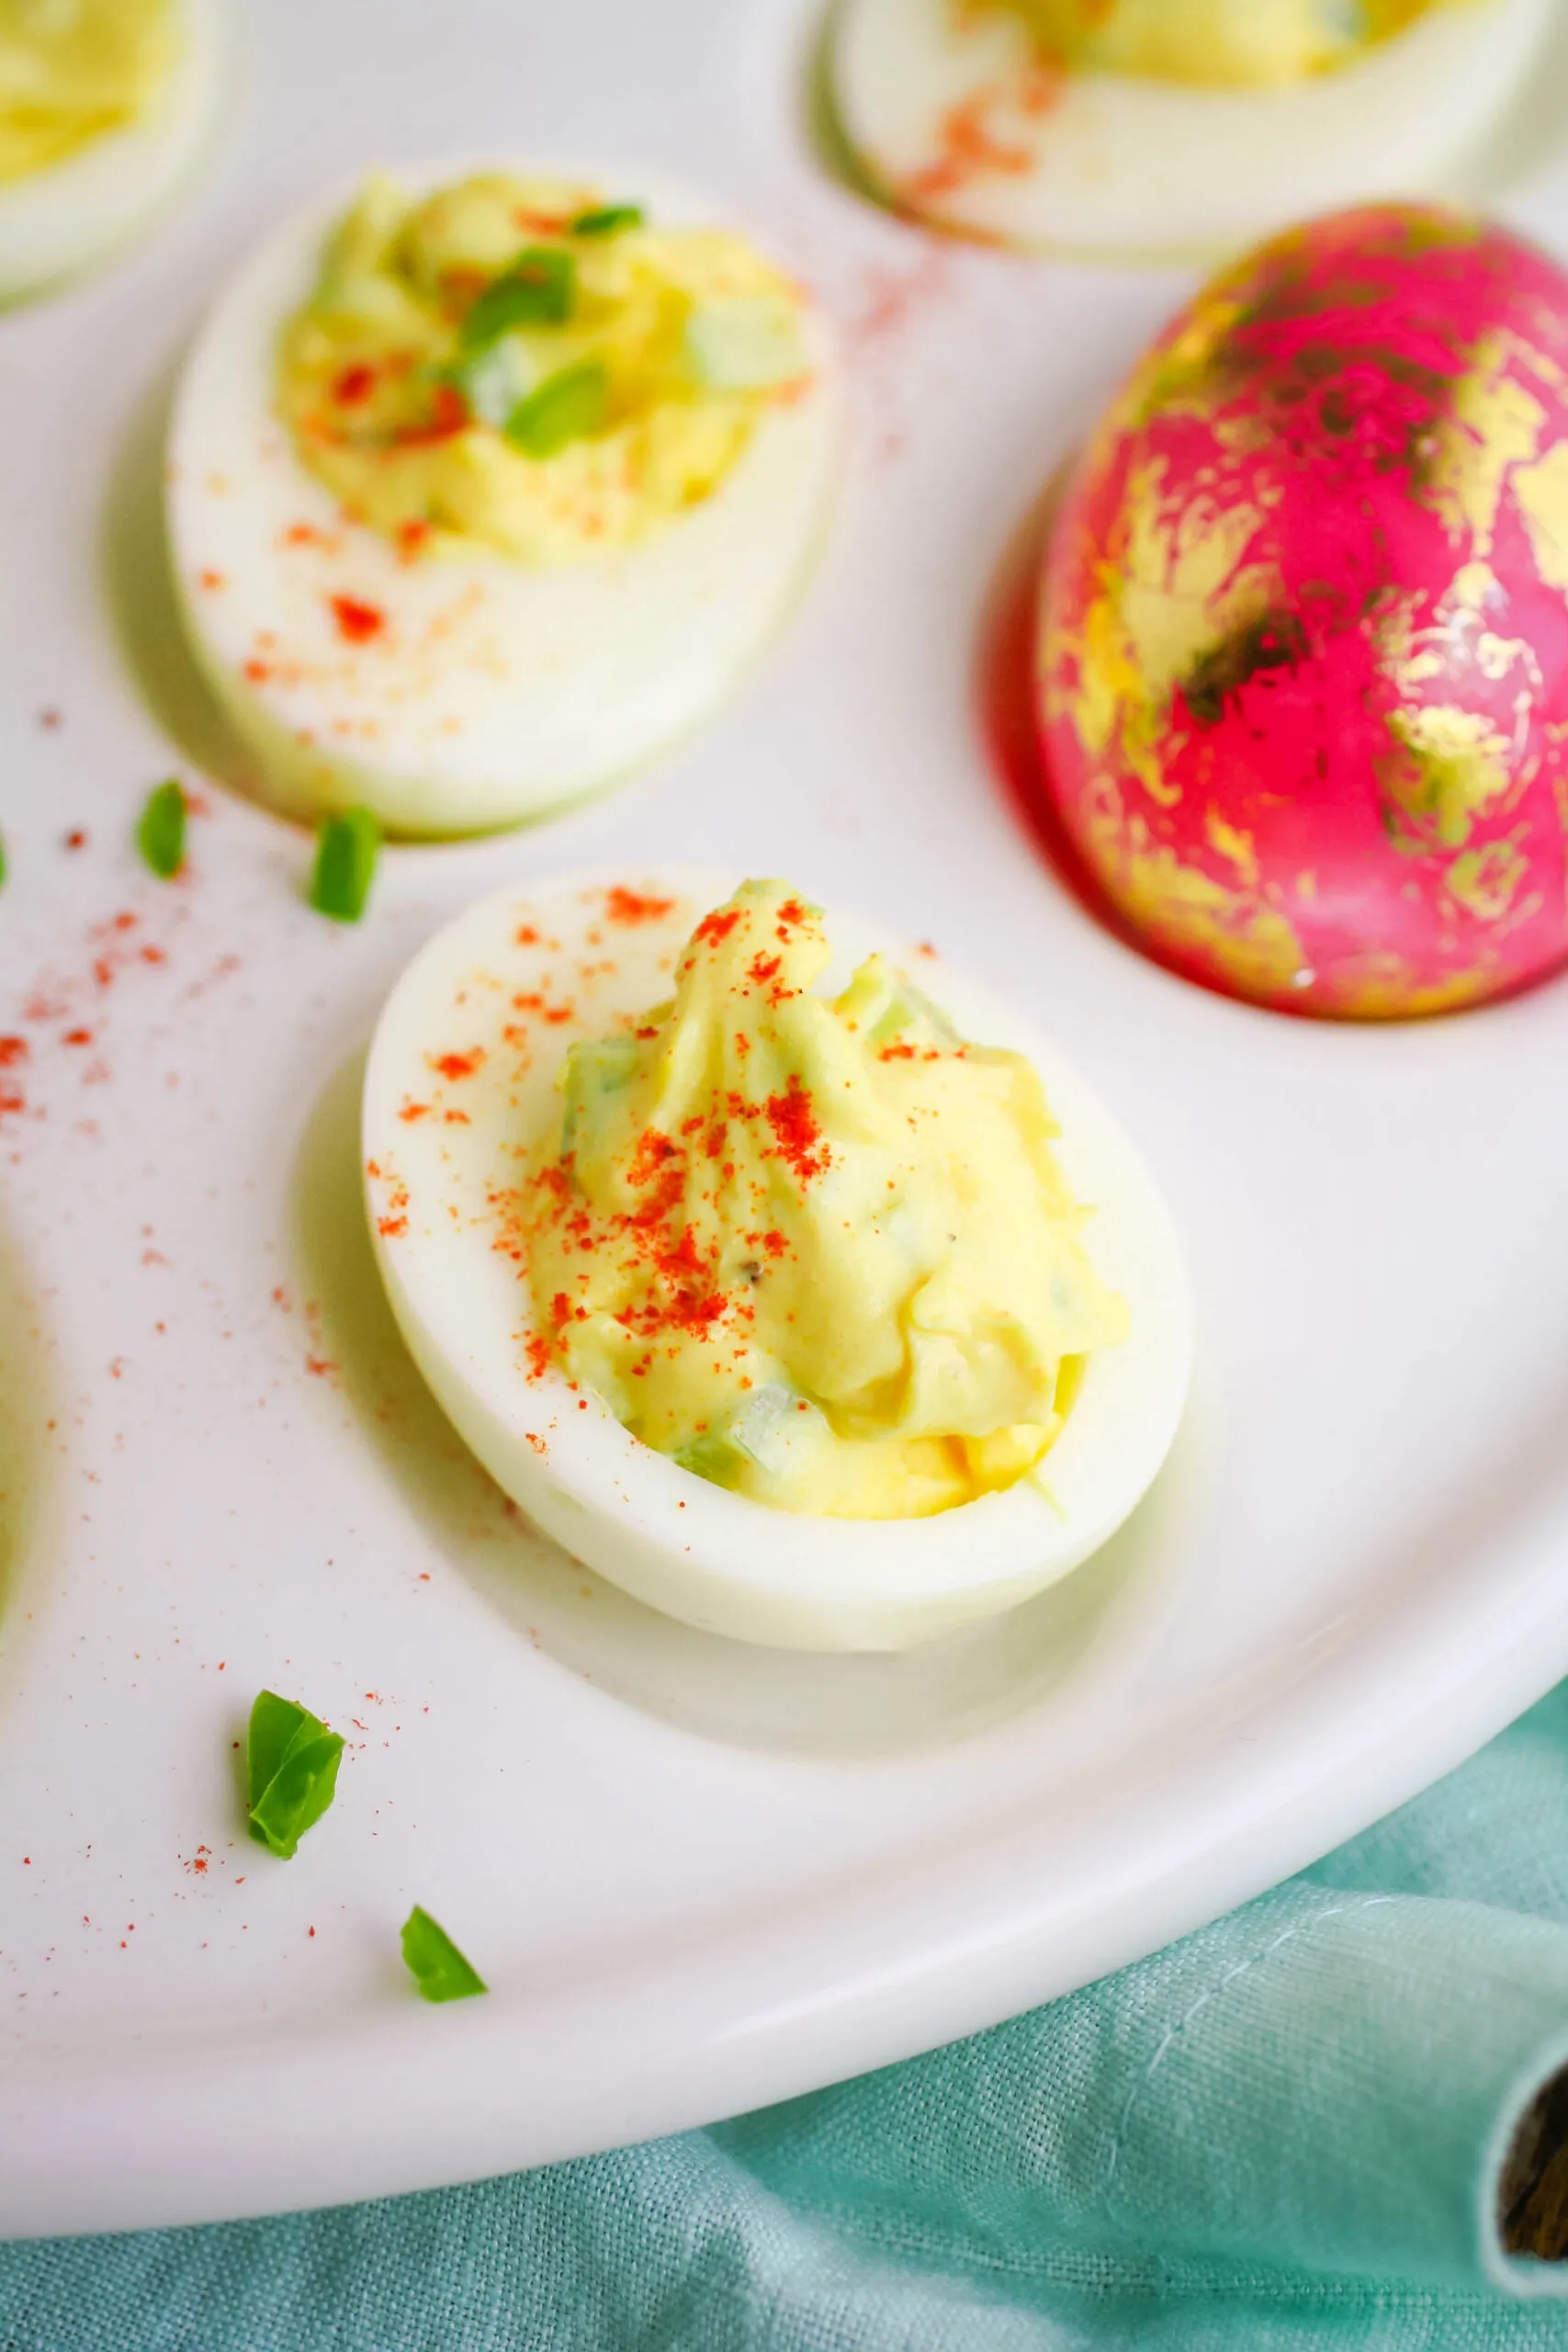 Jalapeño Deviled Eggs are such a treat! Perfect for any gathering - and make a great appetizer.